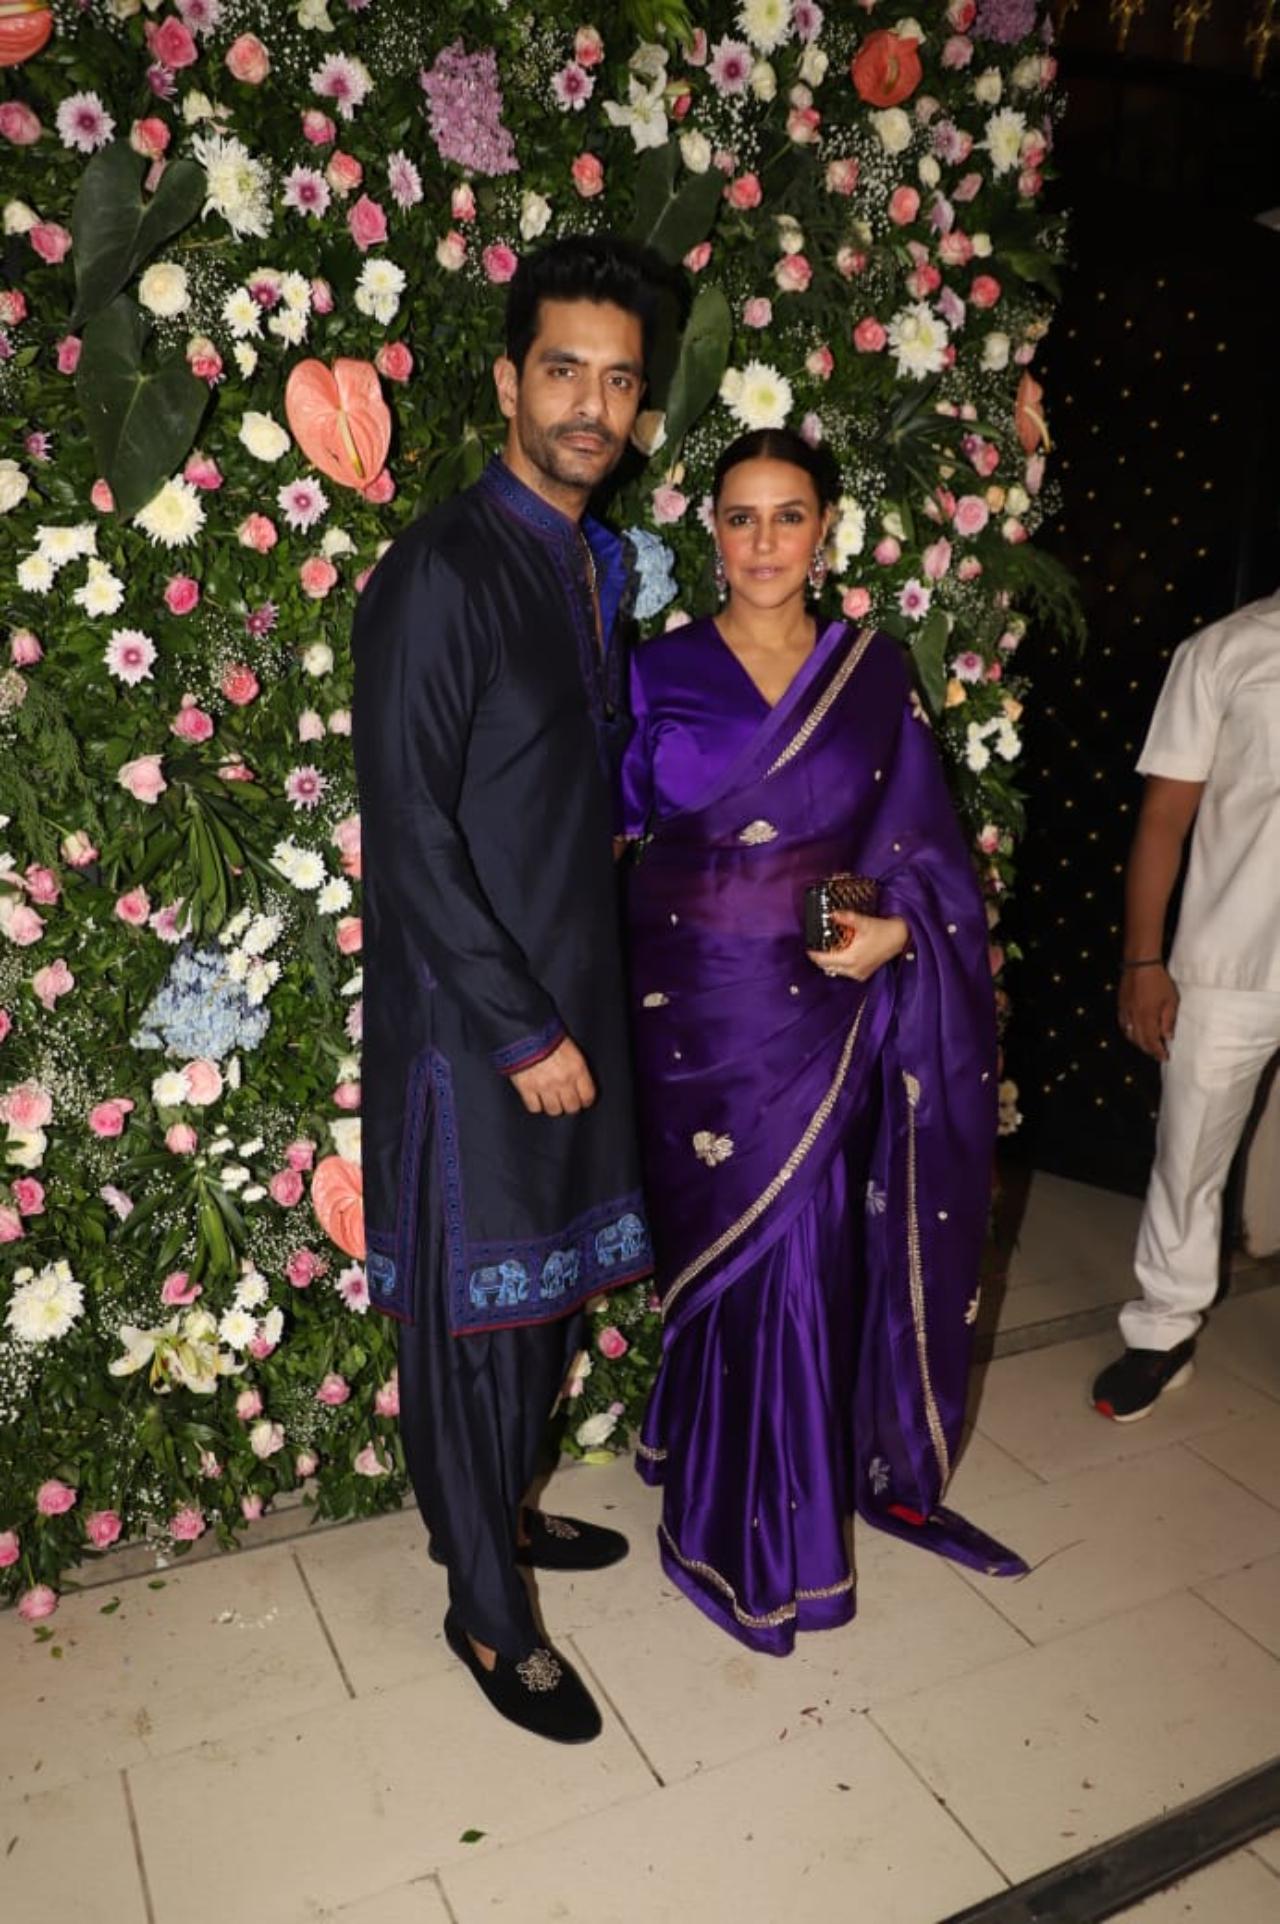 Angad Bedi looked smart in an all-black ensemble, while Neha wore a satin blue saree